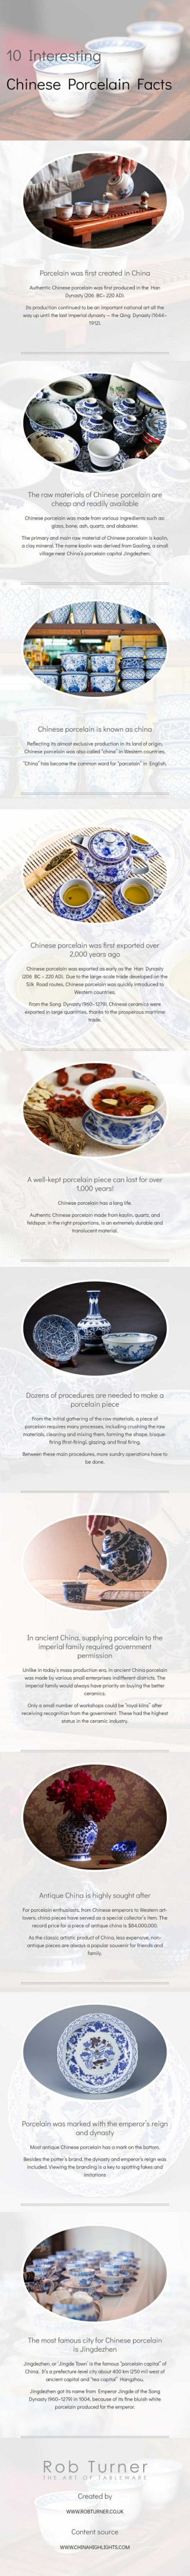 10 Interesting Chinese Porcelain Facts